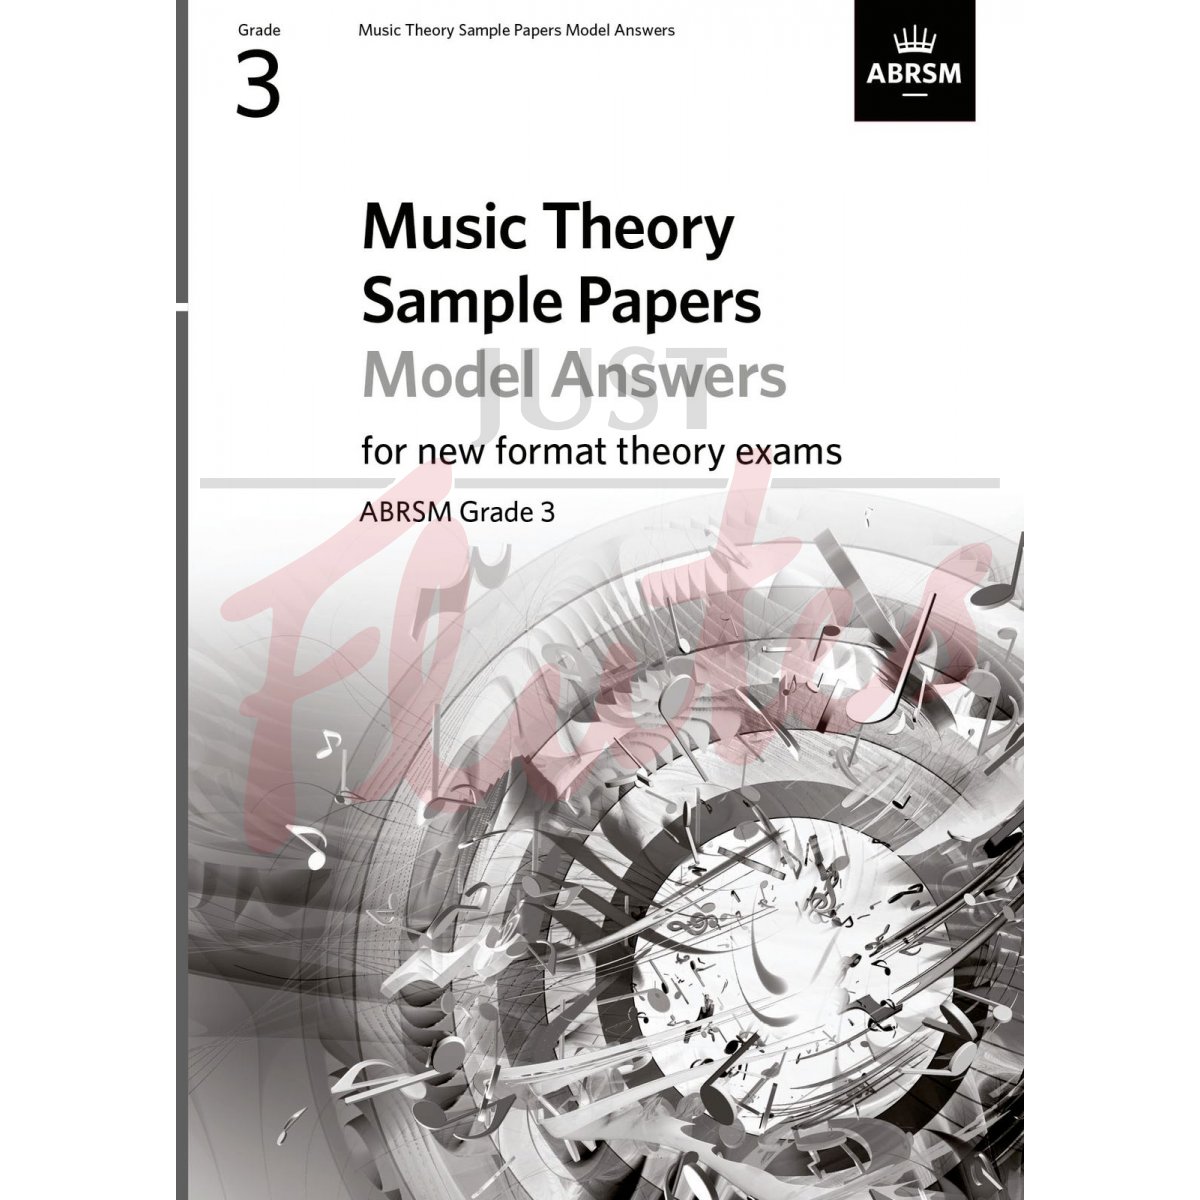 Music Theory Sample Papers Grade 3 - Model Answers